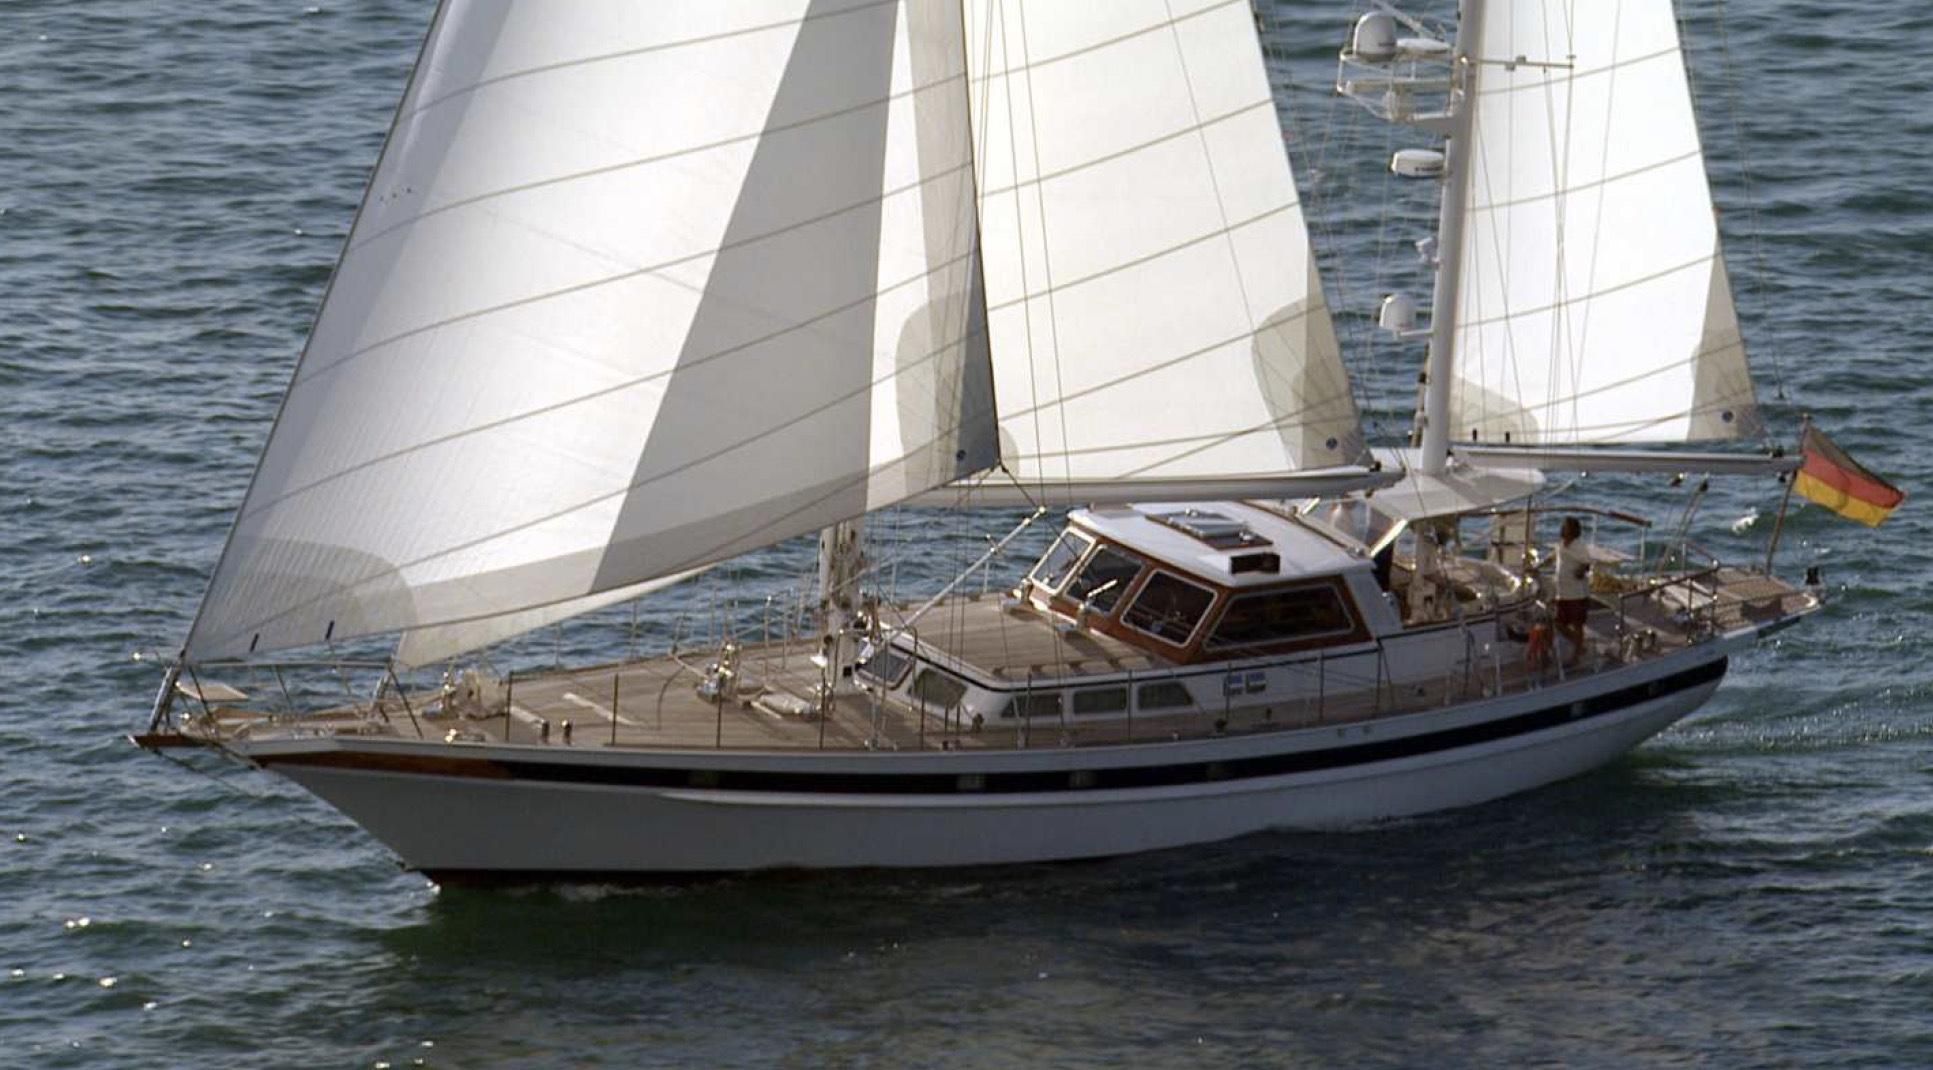 ds 20 sailboat